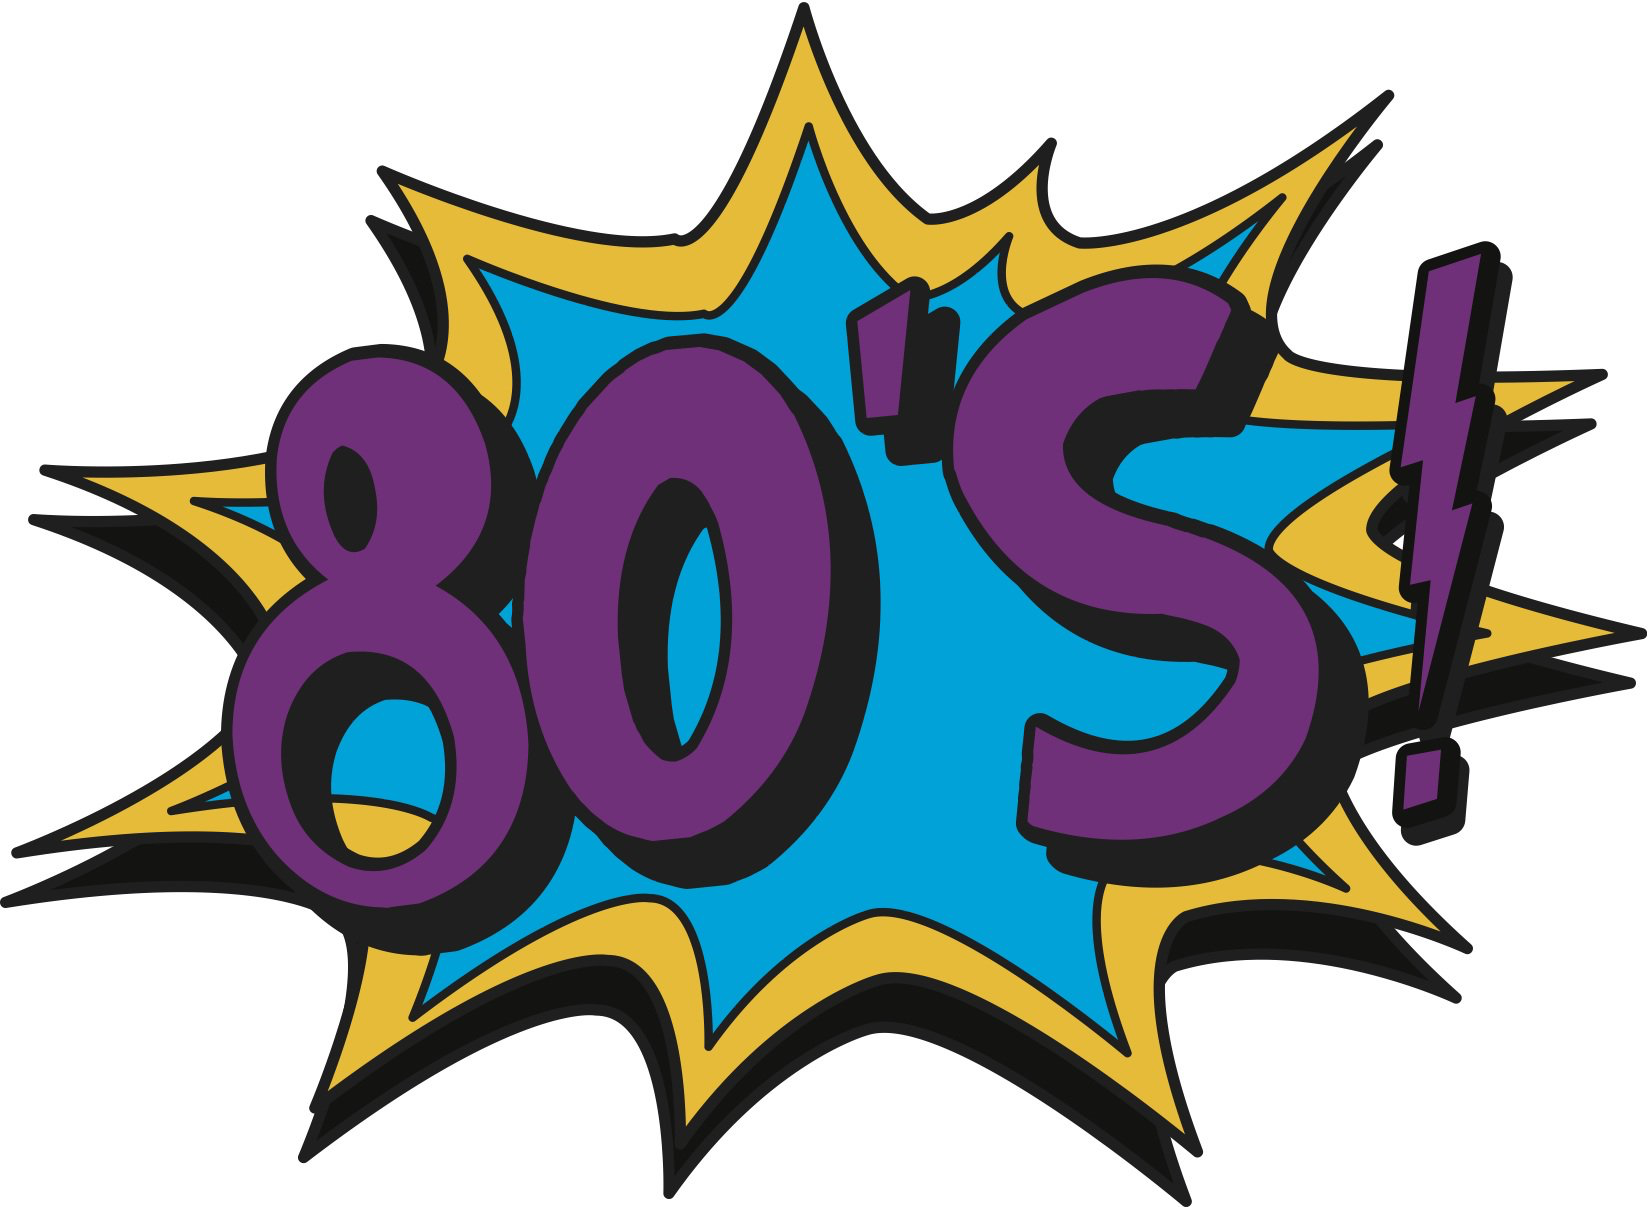  s free download. 80's clipart theme